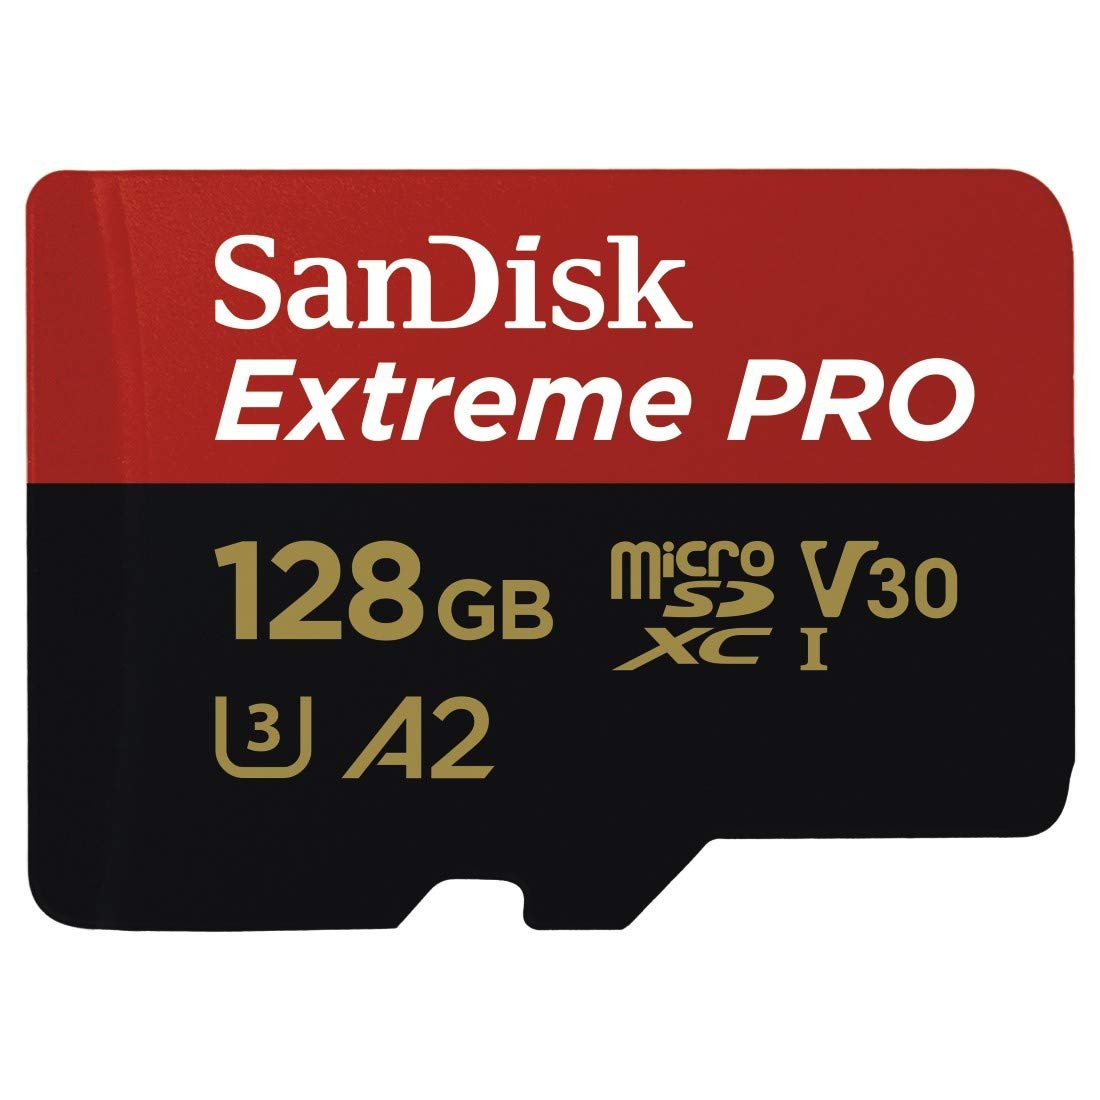 Sandisk Extreme Pro | Fastest Micro SD Memory Card Hero 8